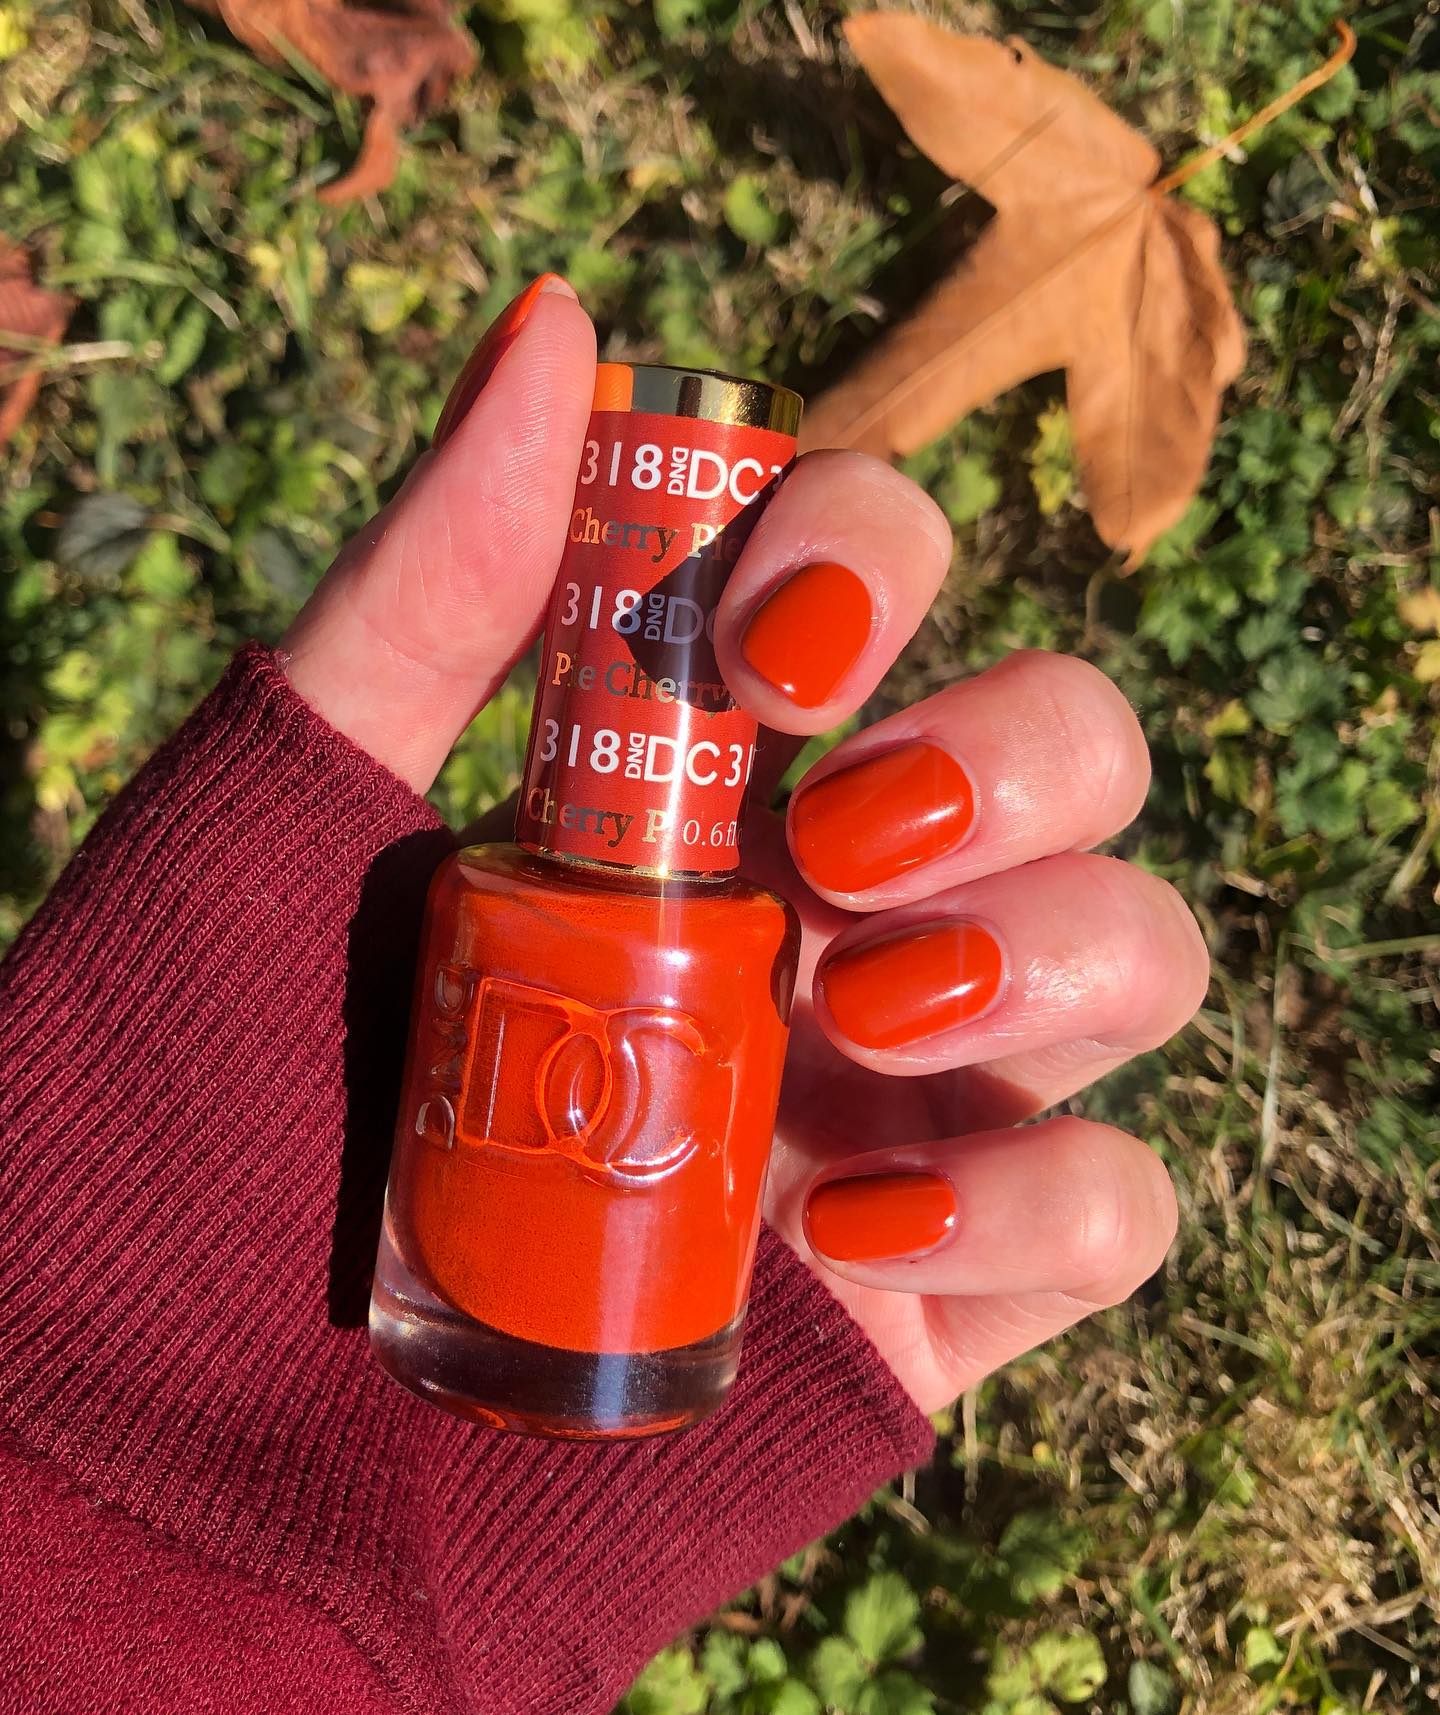 Short red nails are a great way to add some color to your outfit without being too loud. We think that they can be great for work or a night out, depending on the color you choose.